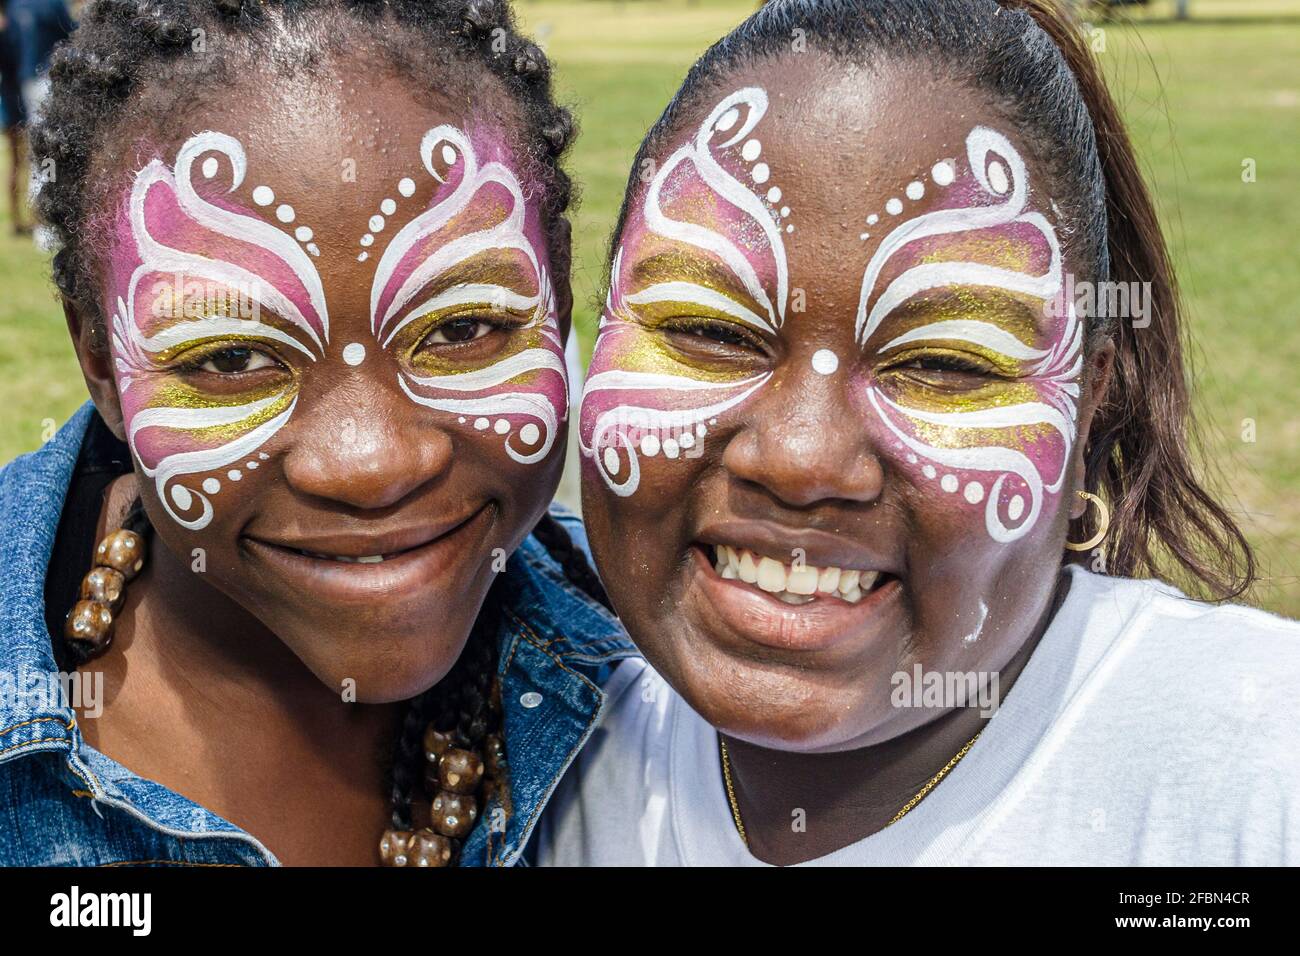 Miami Florida,Tropical Park Droga Free Youth in Town DFYIT,teen Student anti addiction group picnic,Black teen teenage ragazze amici smiling face paint Foto Stock